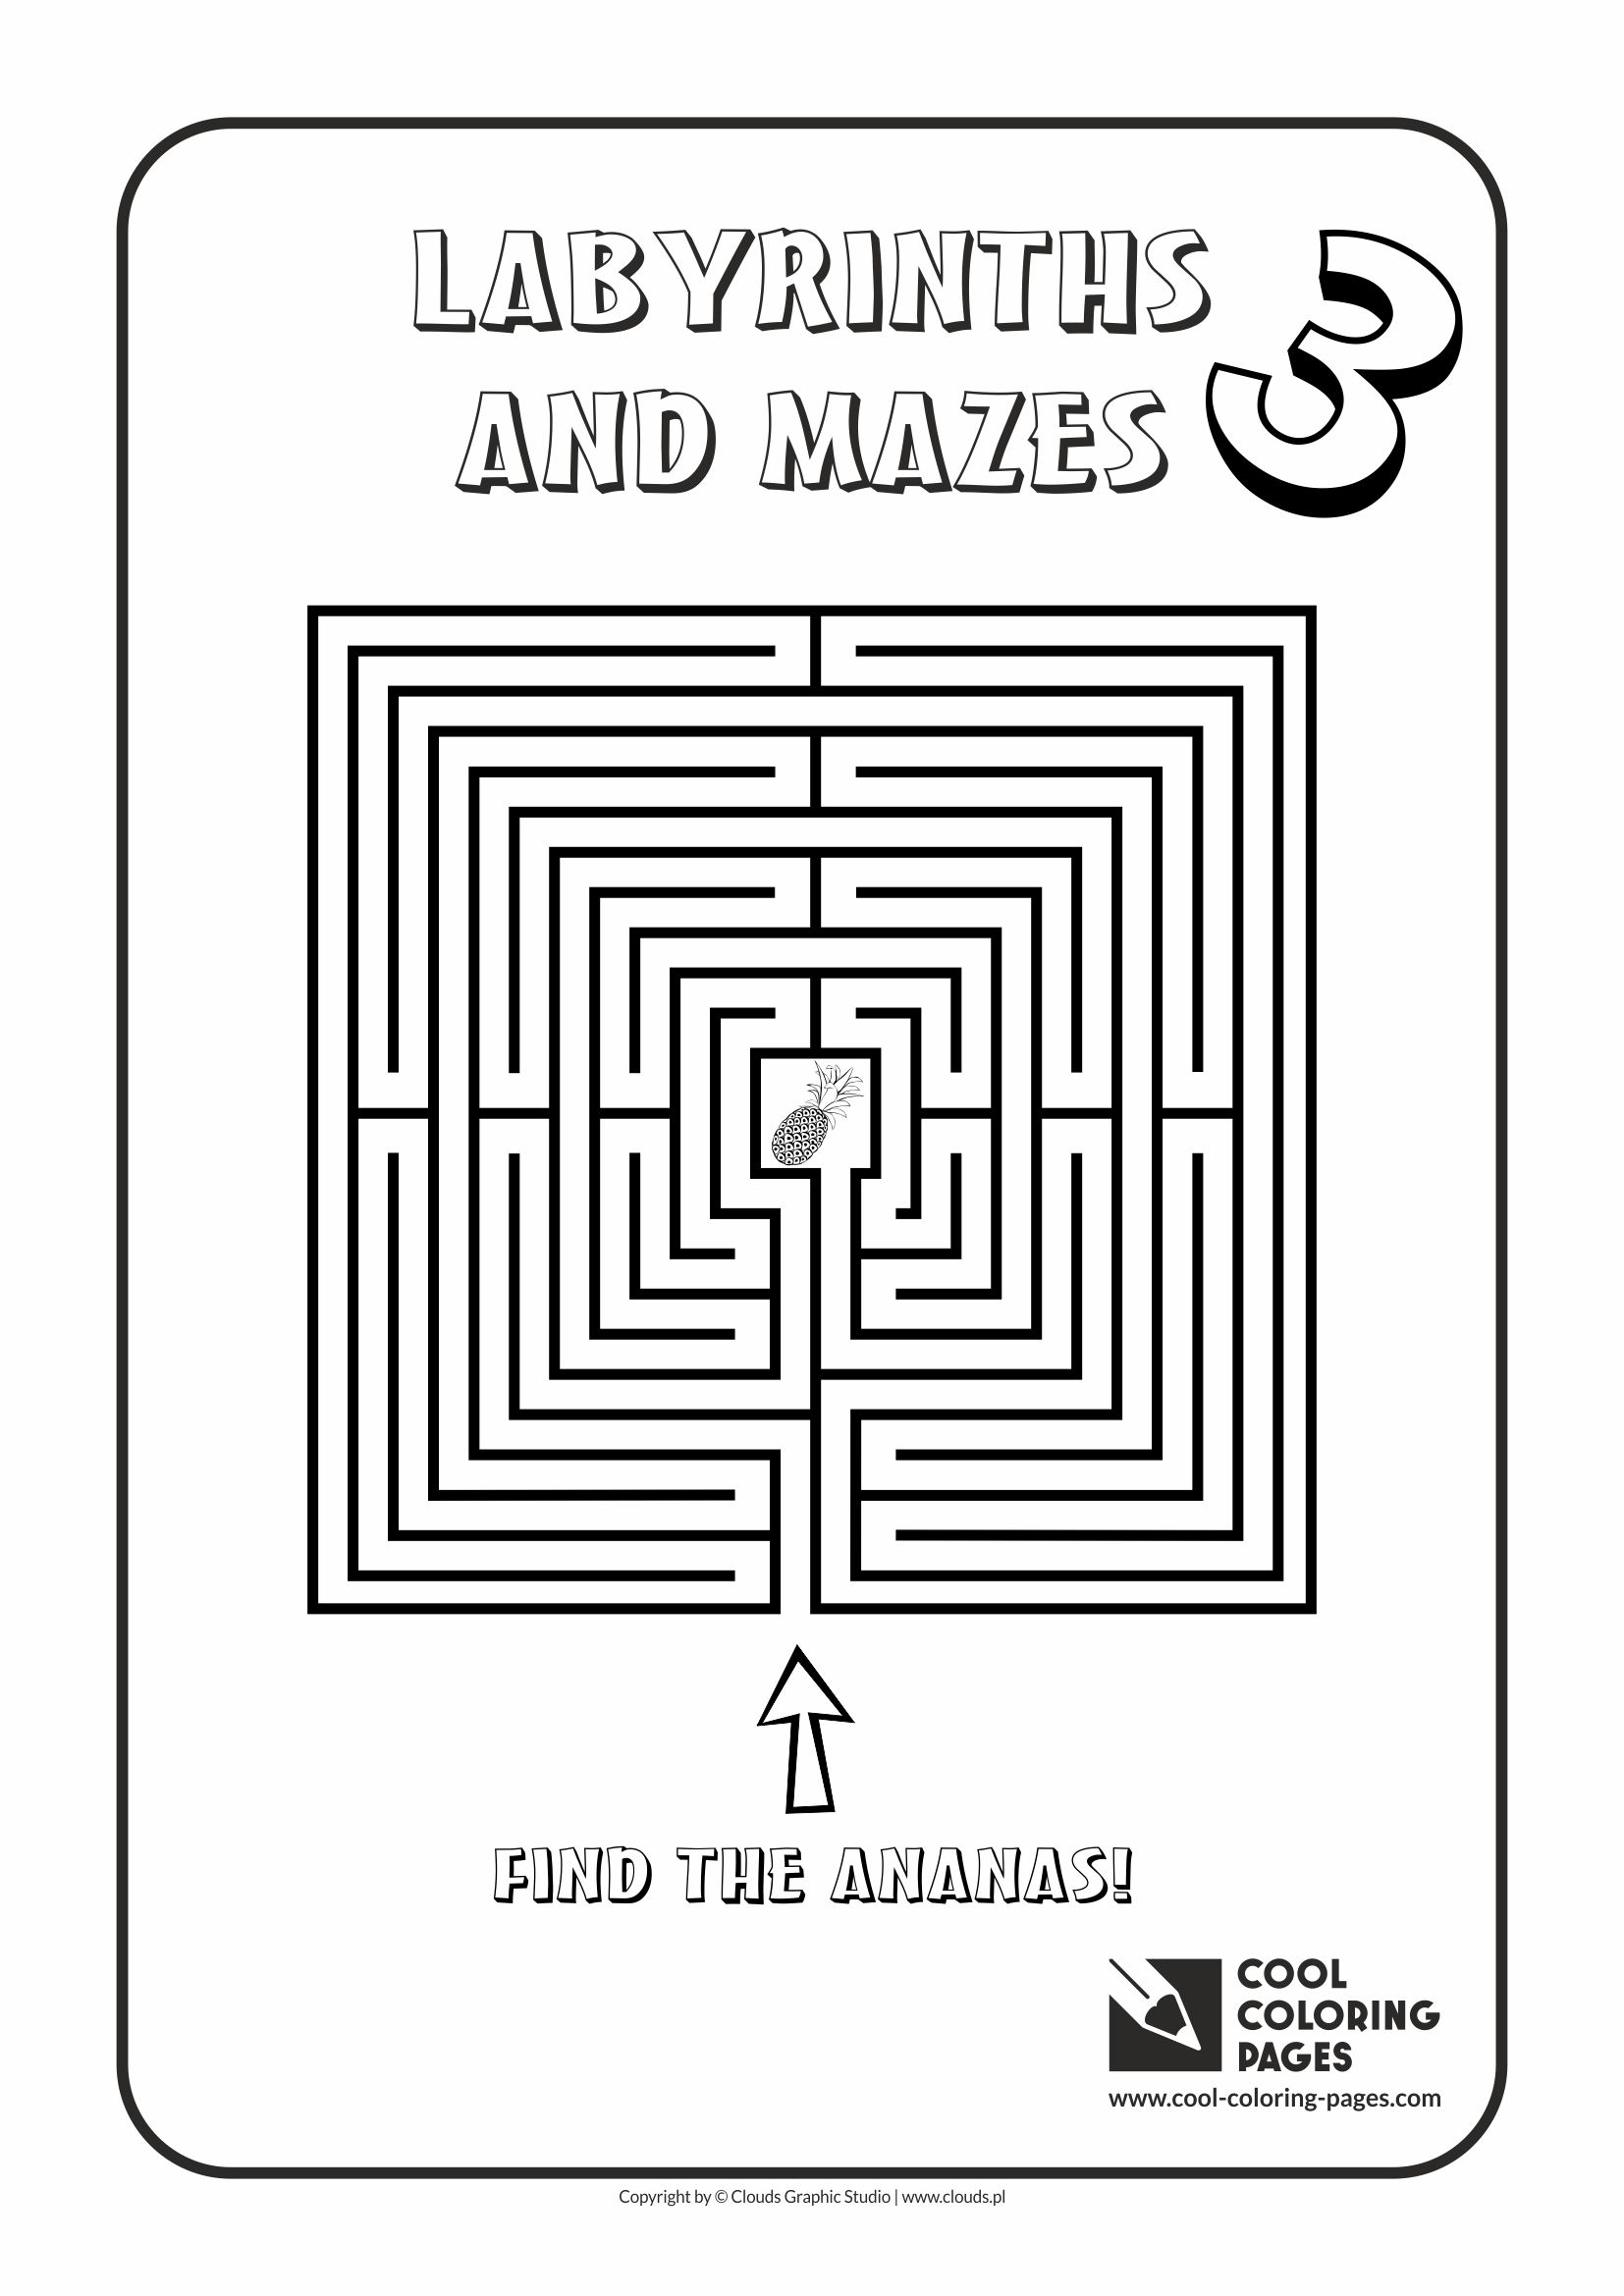 Cool Coloring Pages - Labyrinths and mazes / Maze no 3